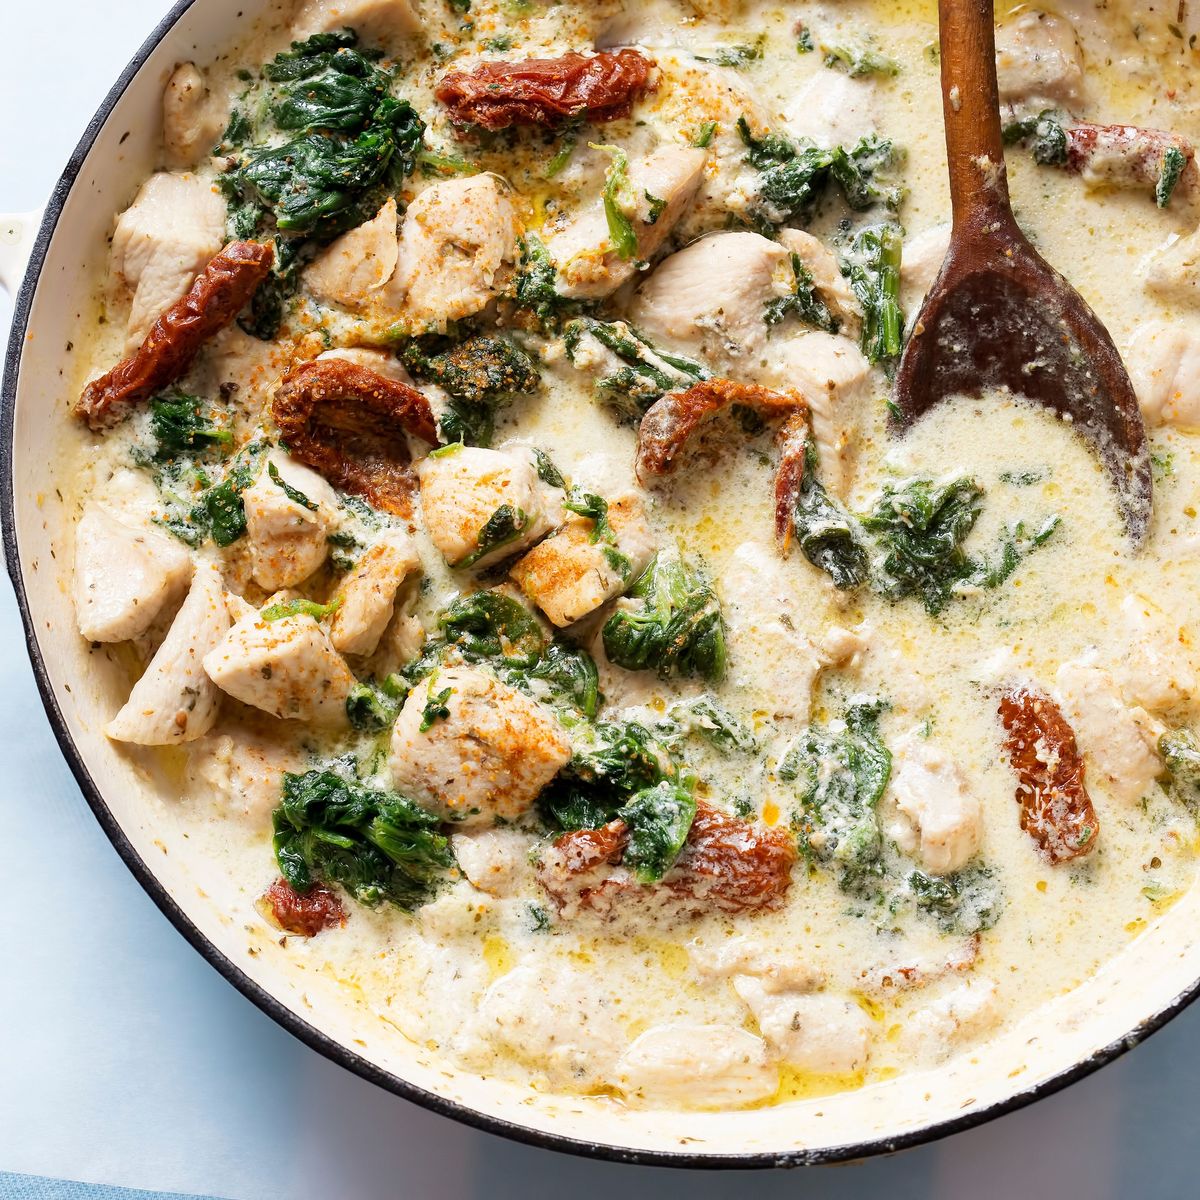 Creamy Tuscan Chicken with Mushroom Risotto